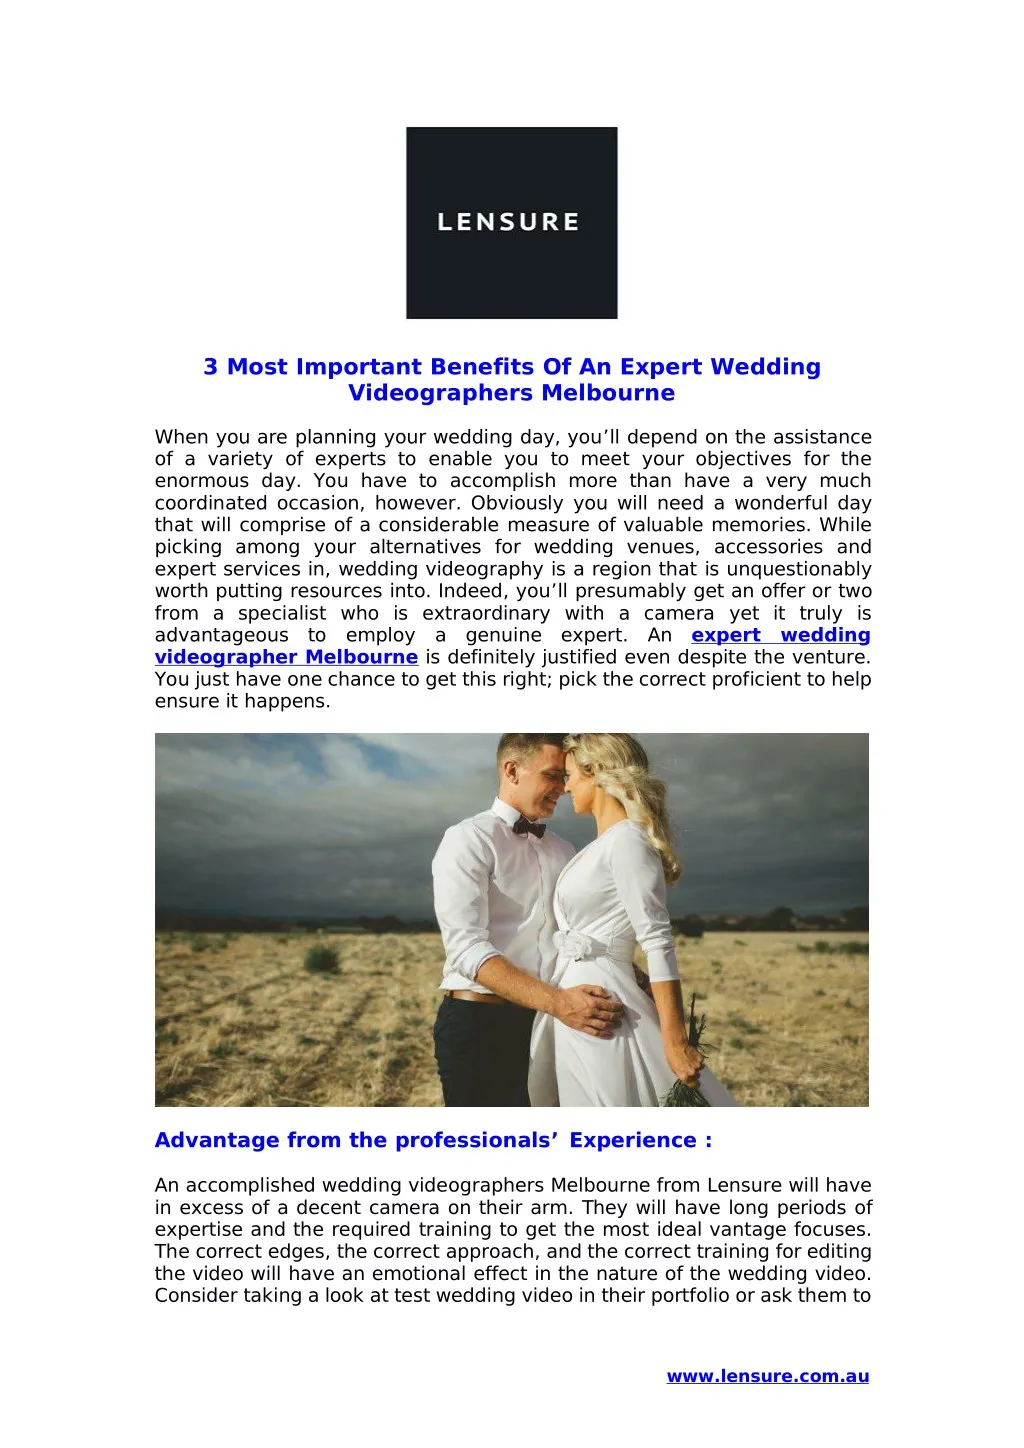 3 most important benefits of an expert wedding